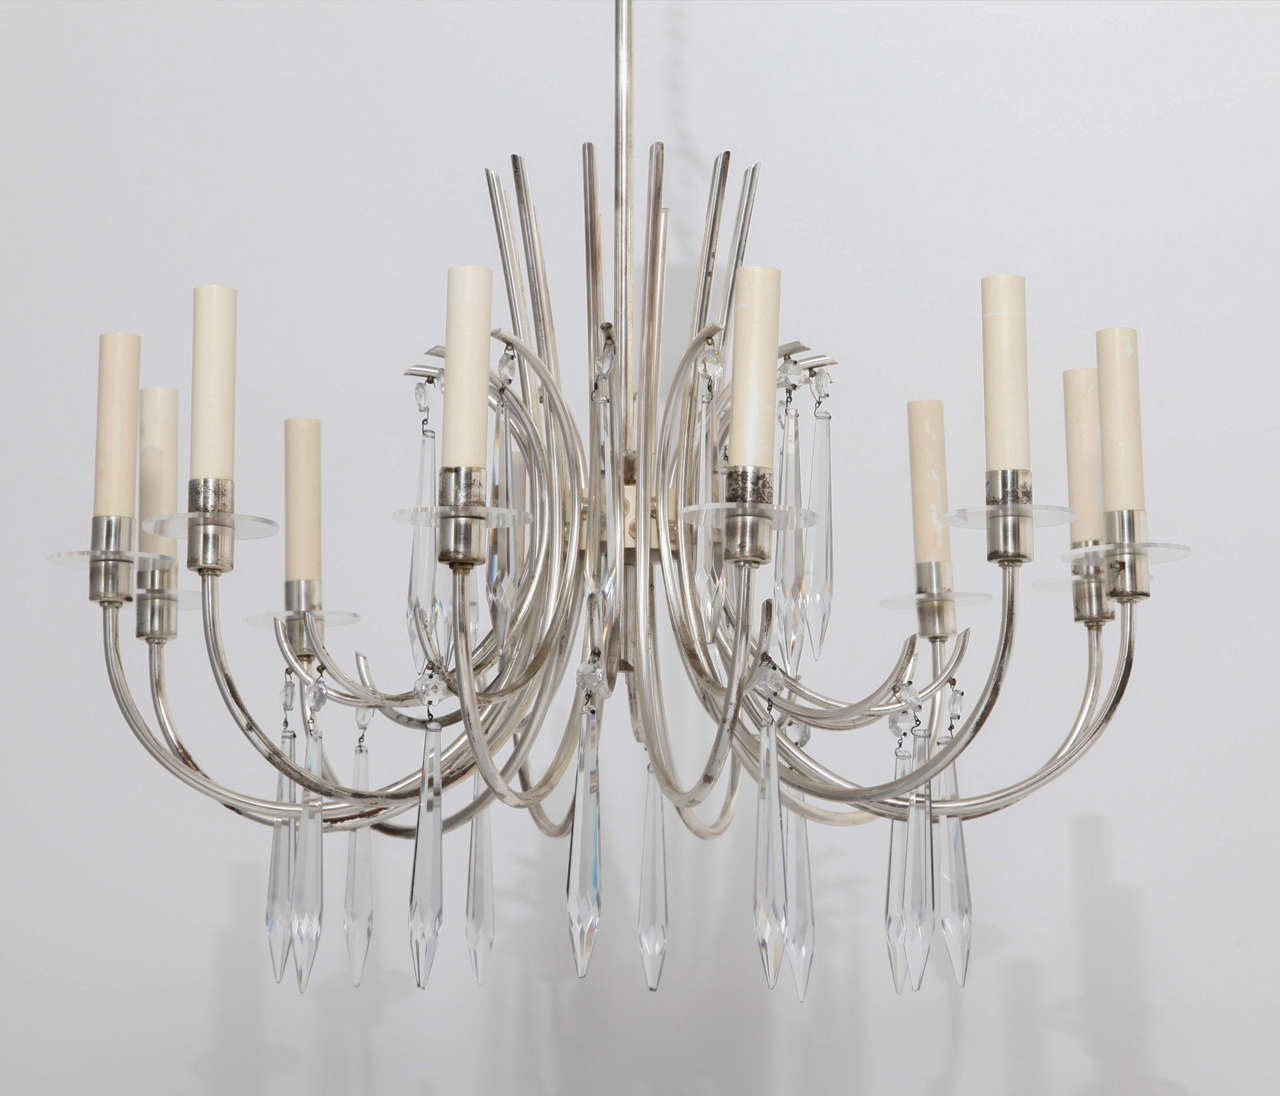 Twelve light candles round silver chandelier with crystal pendants on two levels. In excellent condition, wiring has been checked and confirmed in order,US use. Newly cleaned.